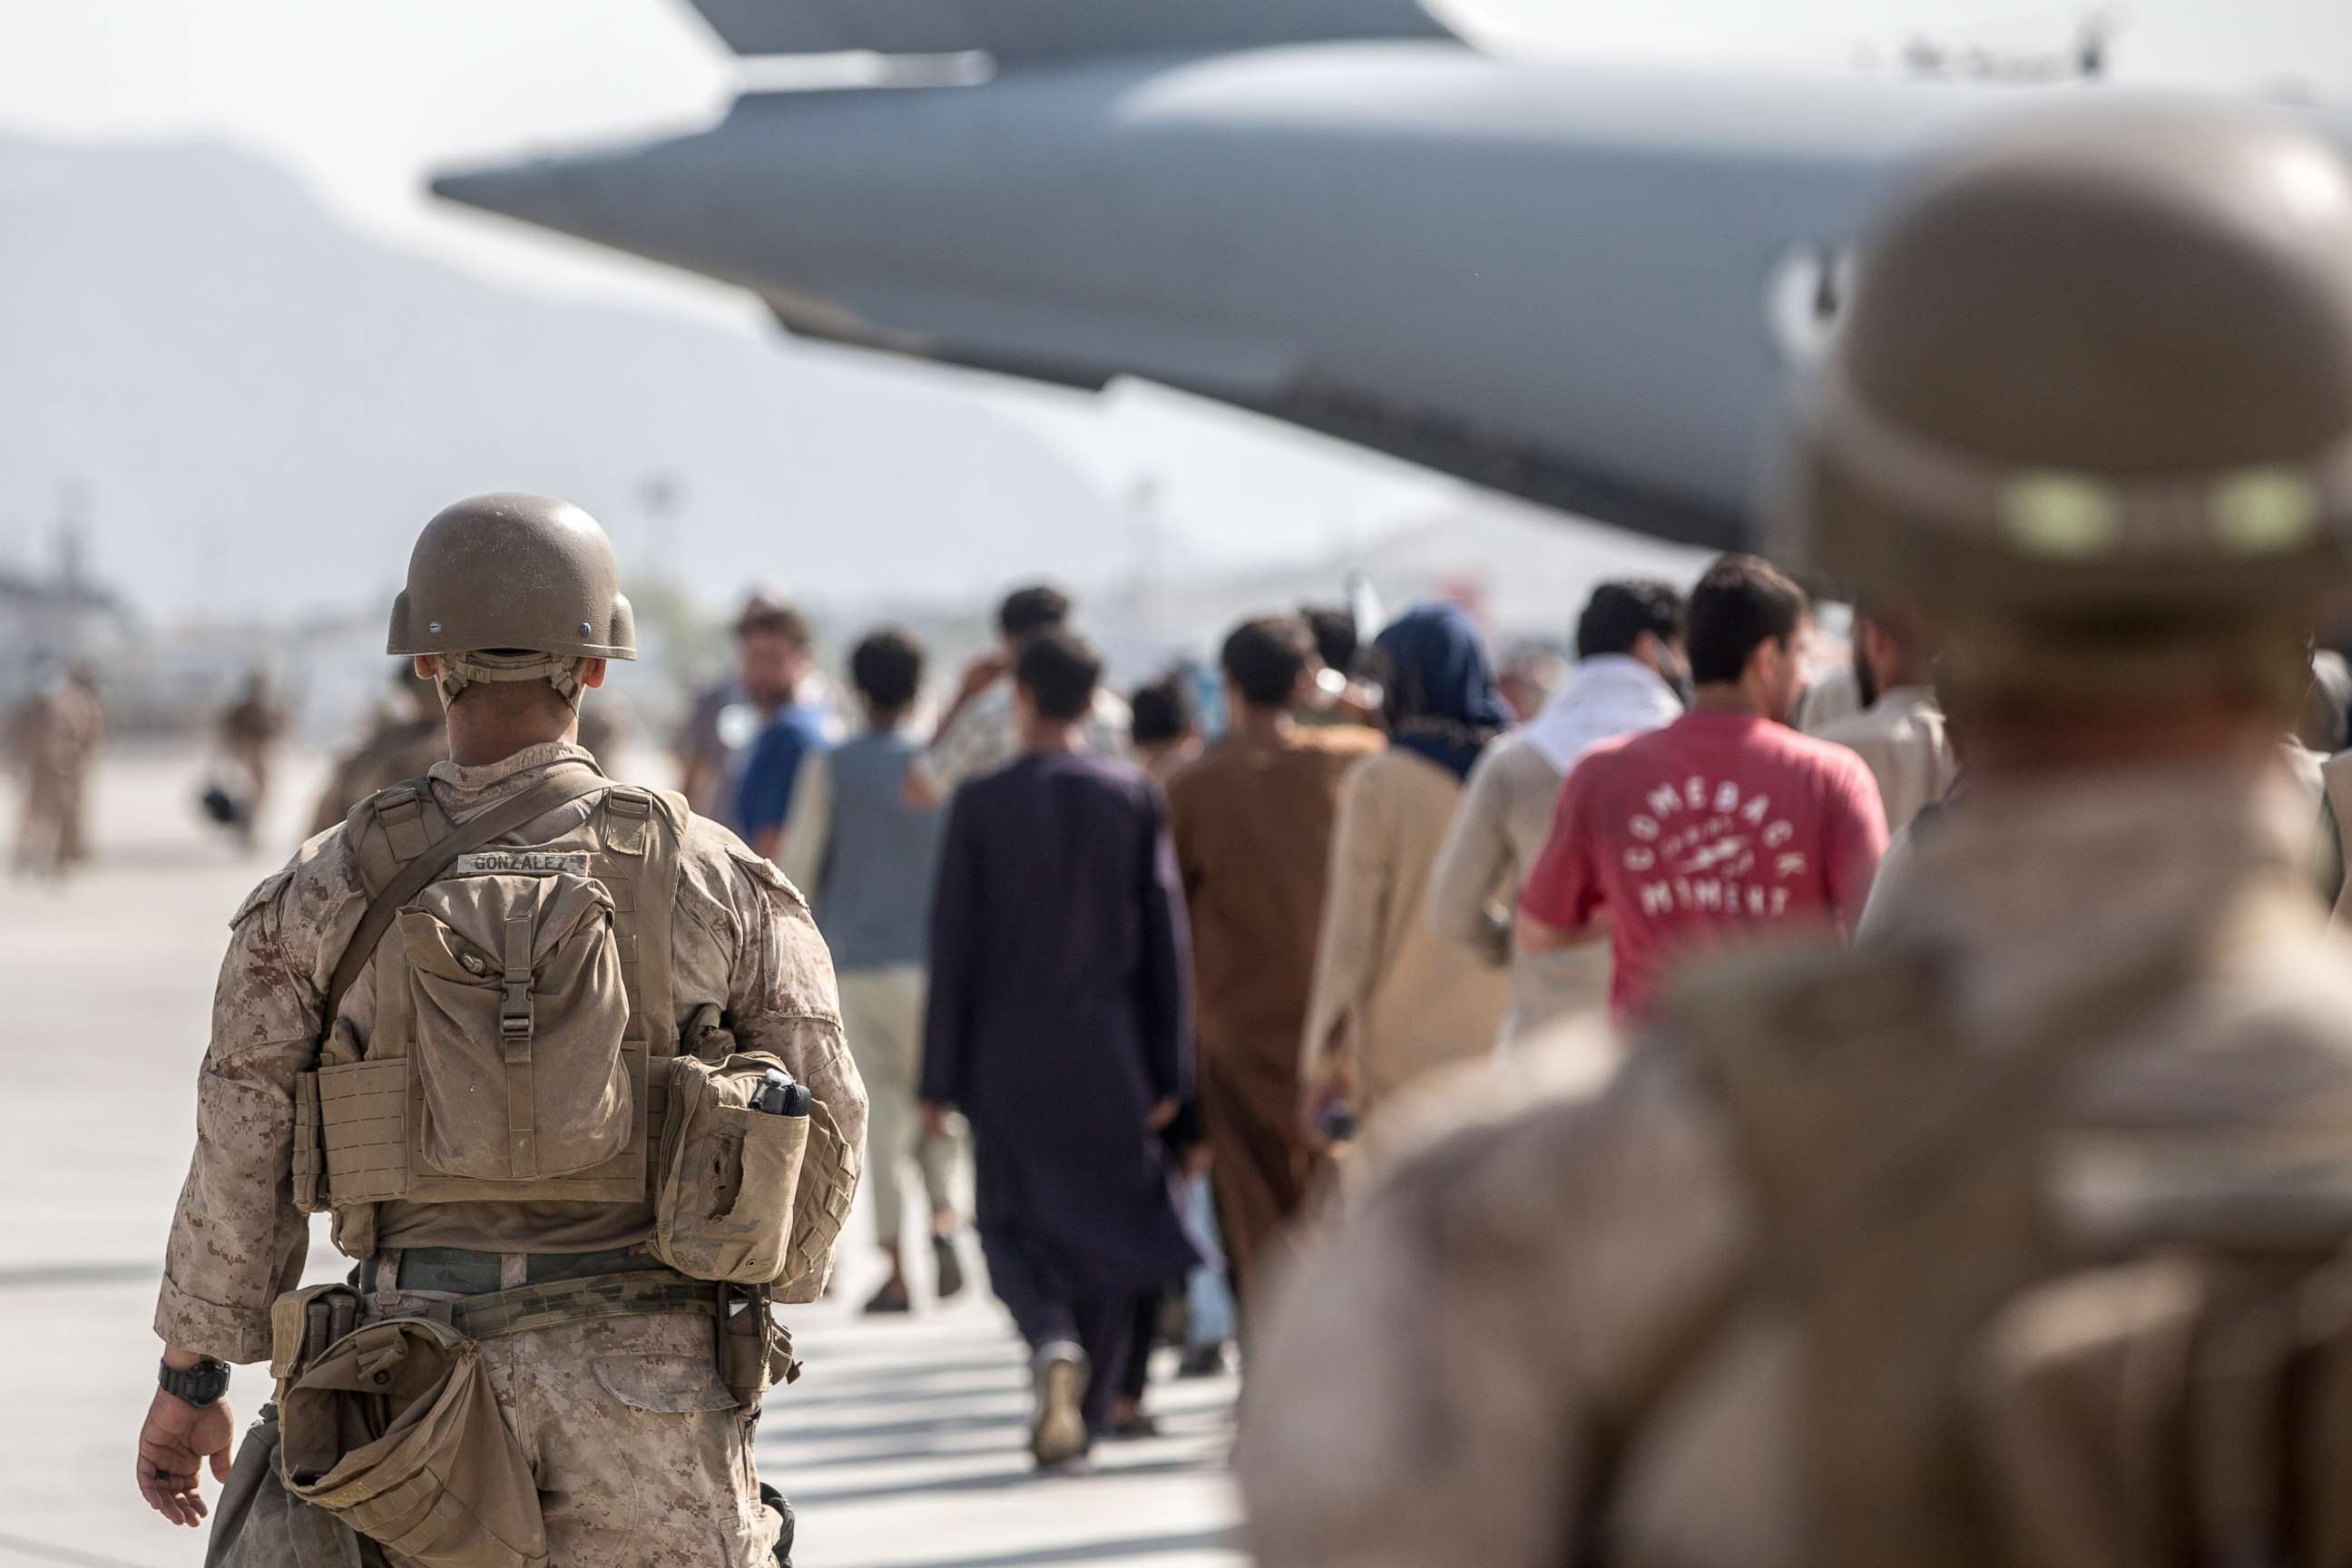 PHOTO: In this Aug. 21, 2021, photo provided by the U.S. Marine Corps, Marines with Special Purpose Marine Air-Ground Task Force-Crisis Response-Central Command guide evacuees on to a U.S. Air Force Boeing C-17 Globemaster III in Kabul, Afghanistan. 